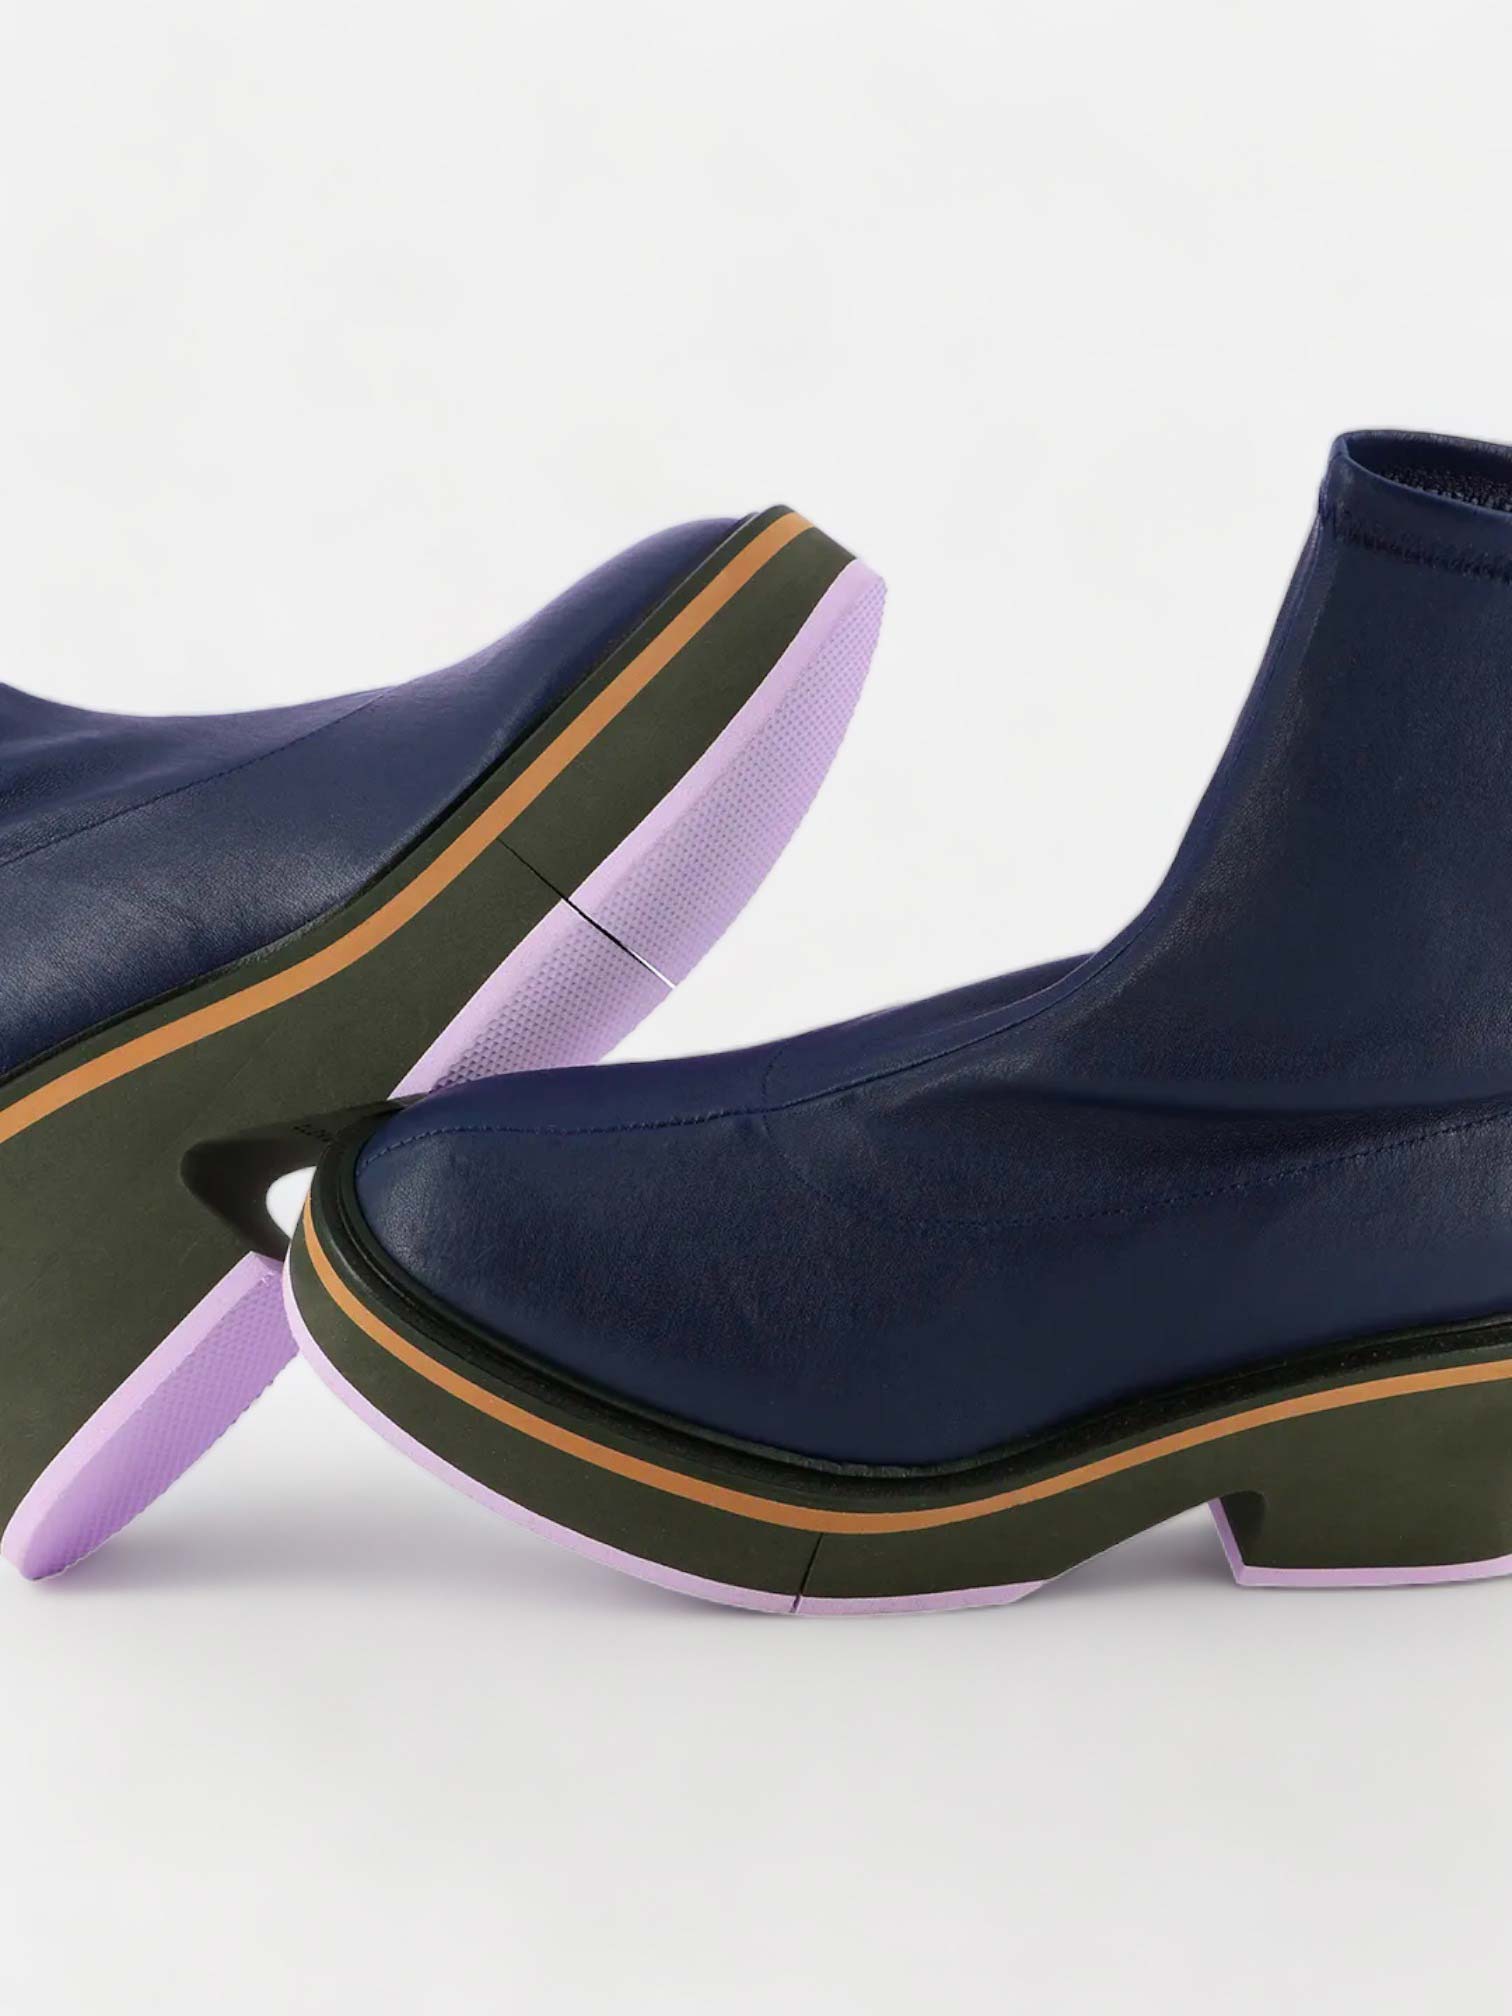 ANKLE BOOTS - ALBANE ankle boots, stretch leather blue - 3606063787499 - Clergerie Paris - Europe